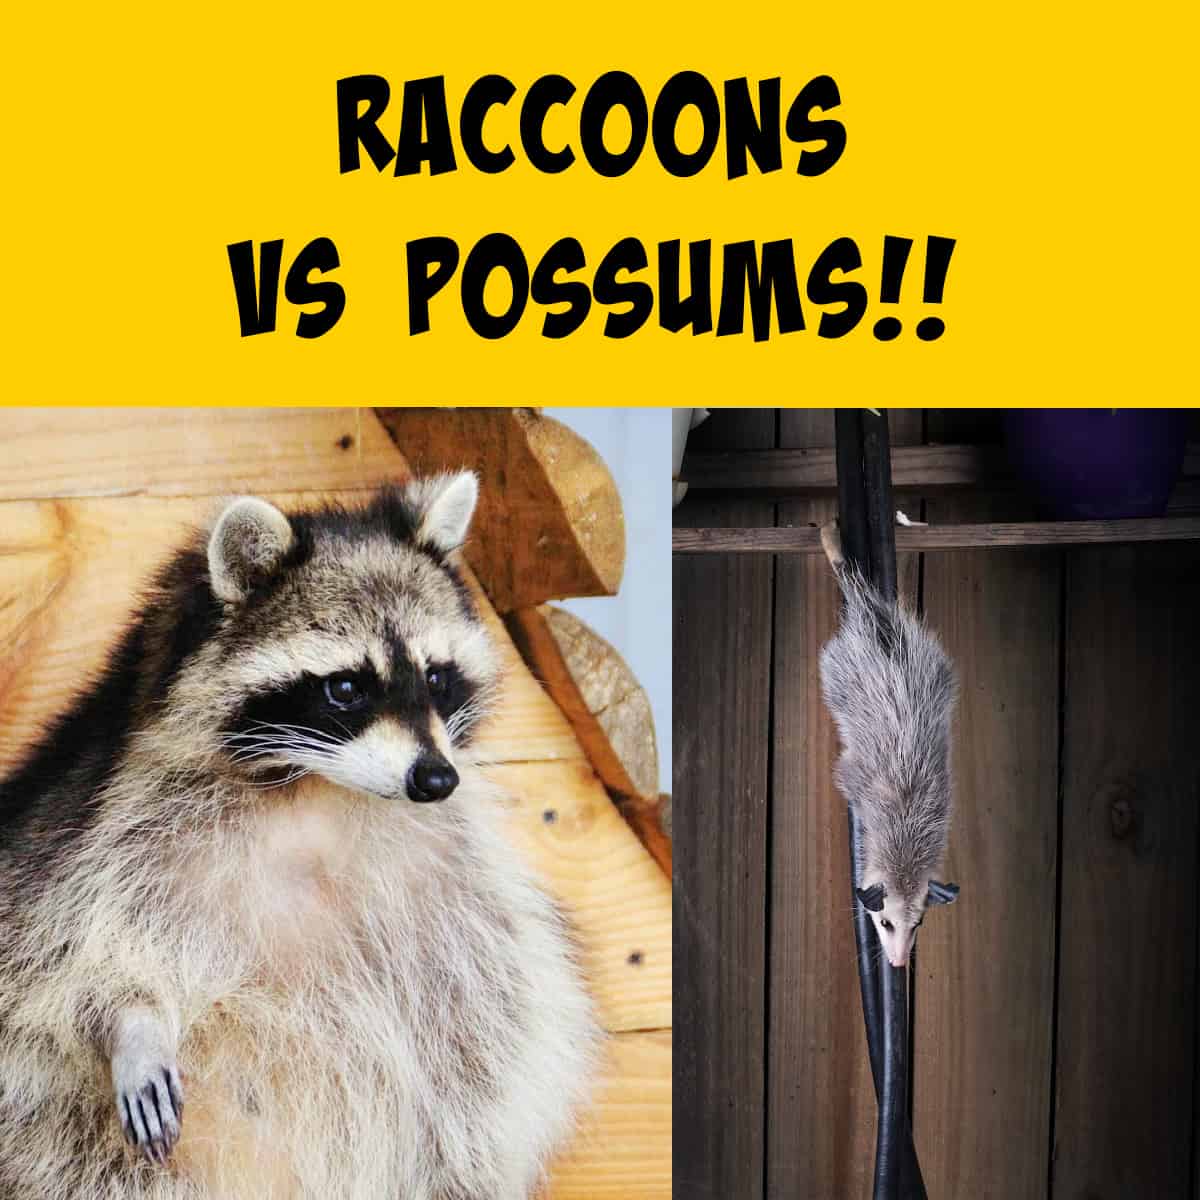 Side by Side images of a raccoon and possum